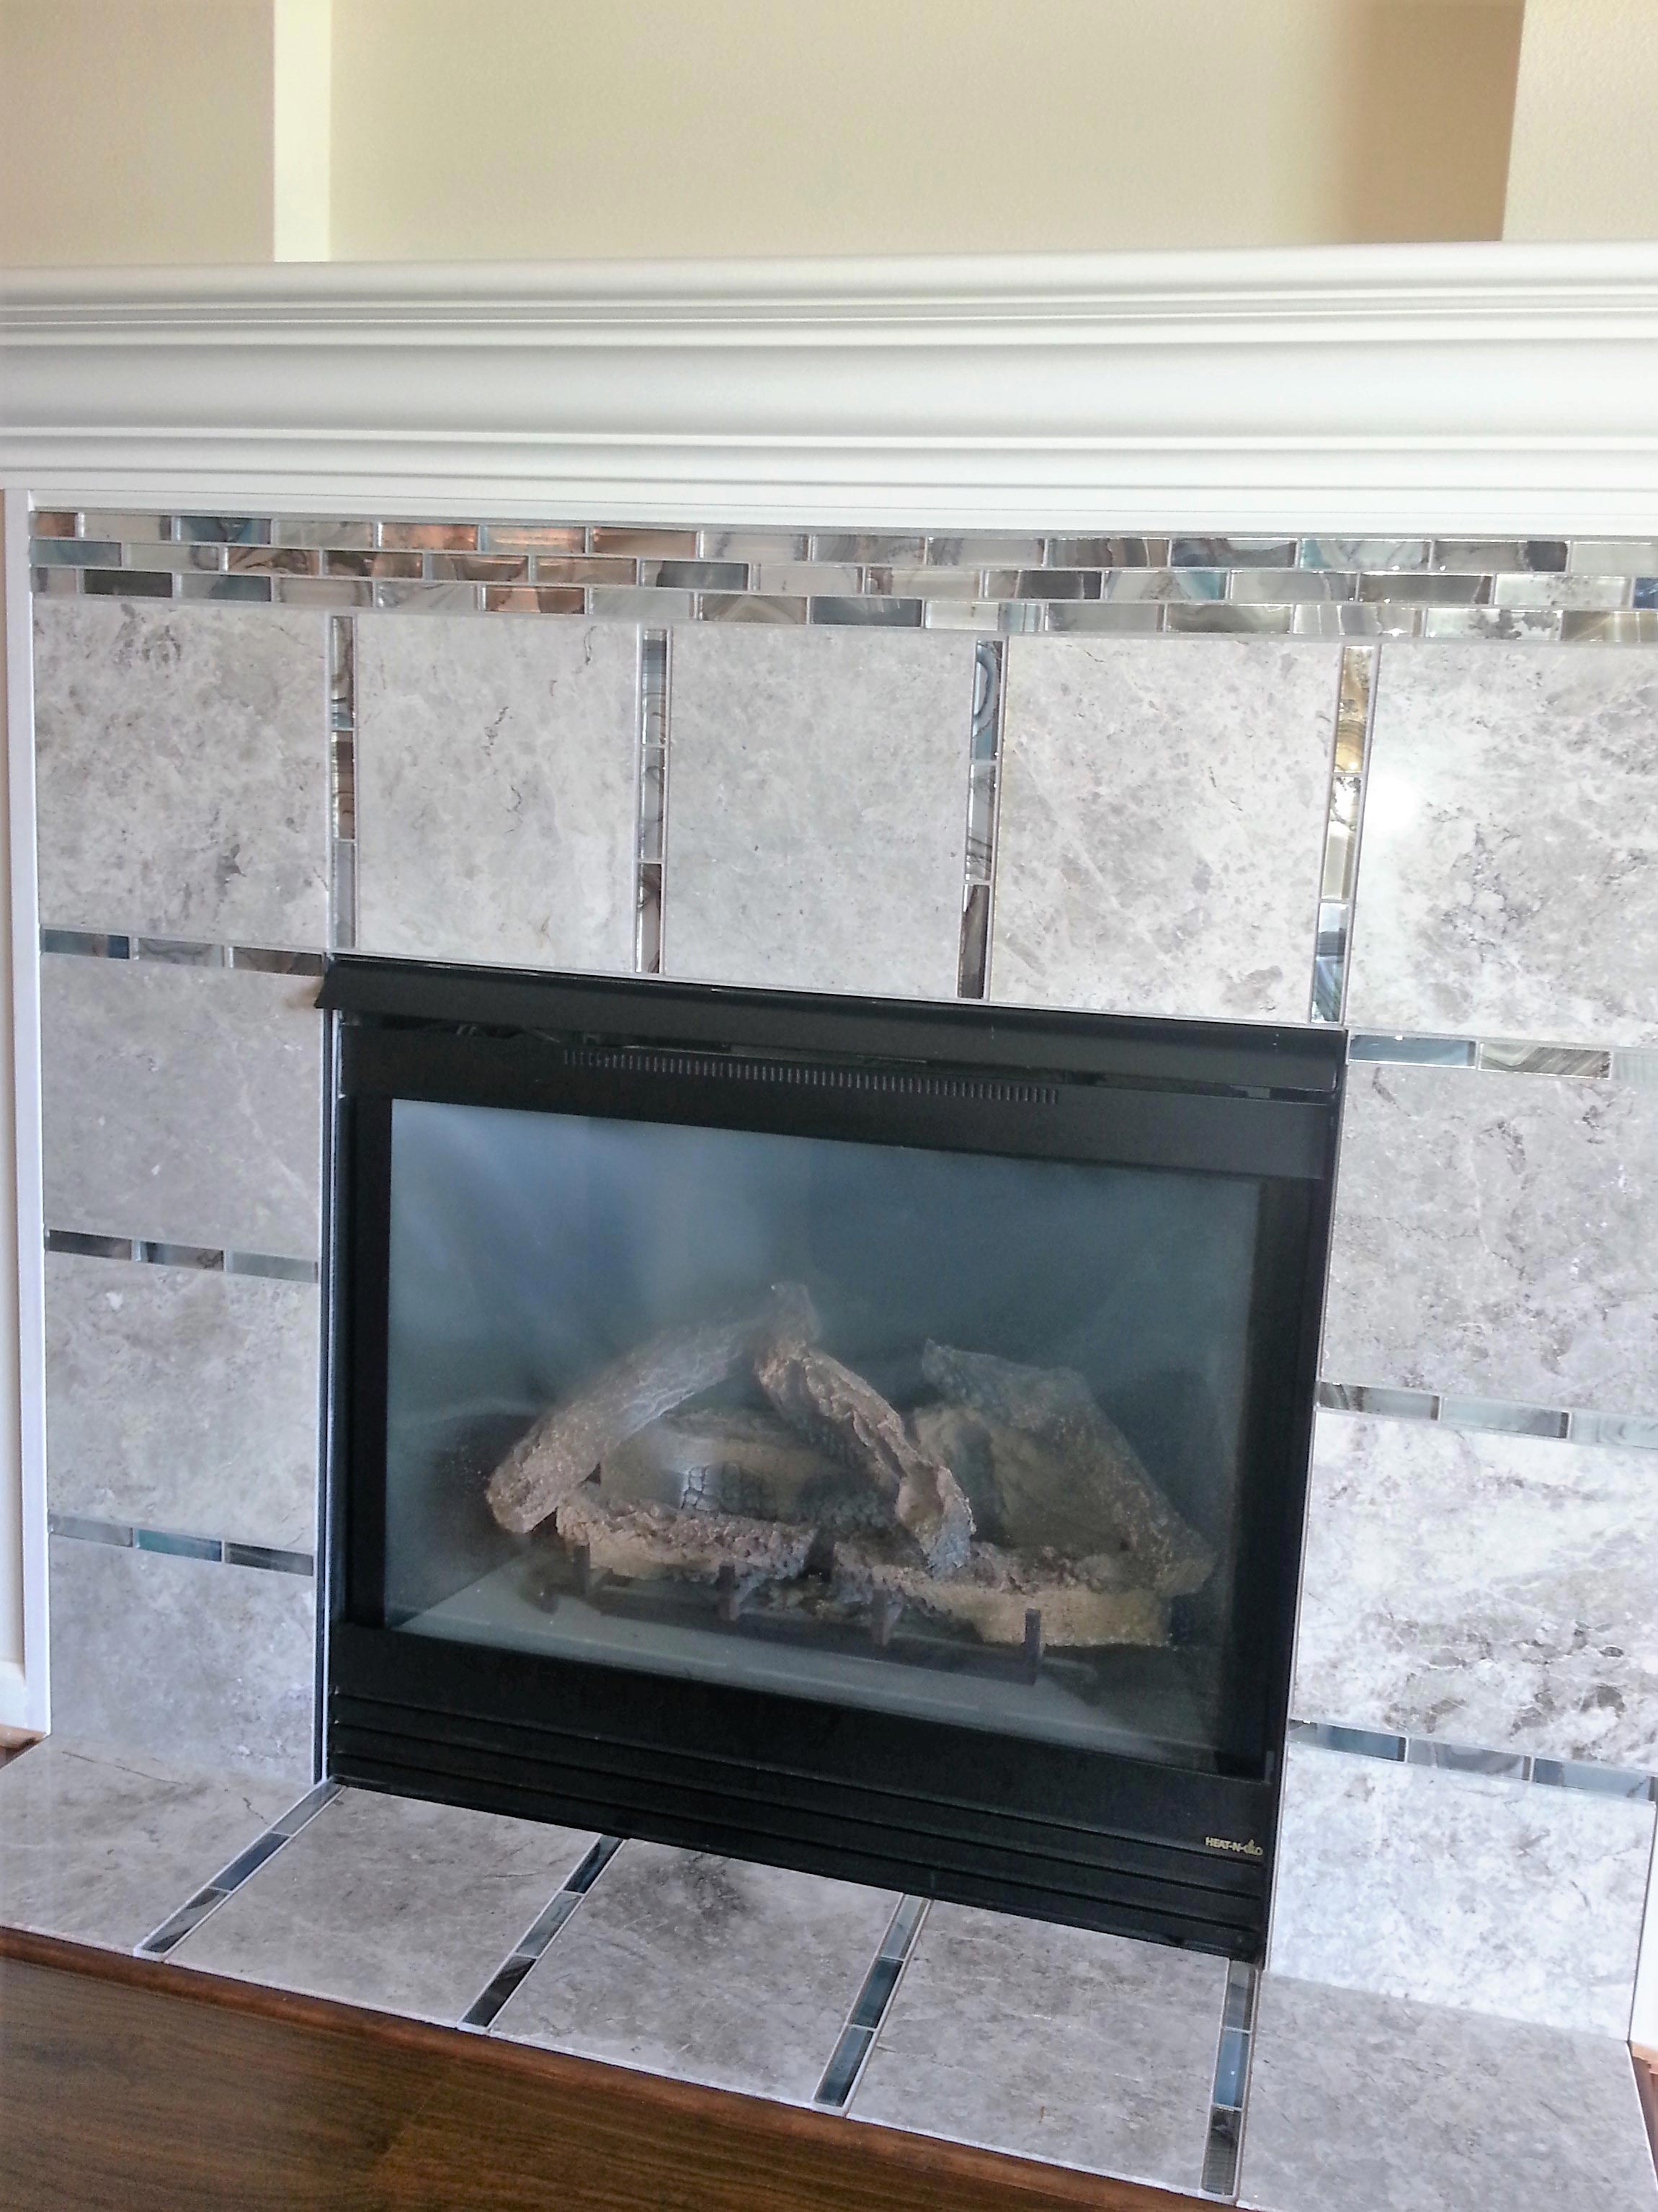 TN Miller Remodeling can create and renovate your fireplace in a variety of materials to match the style of your home in the greater Hood Canal area.